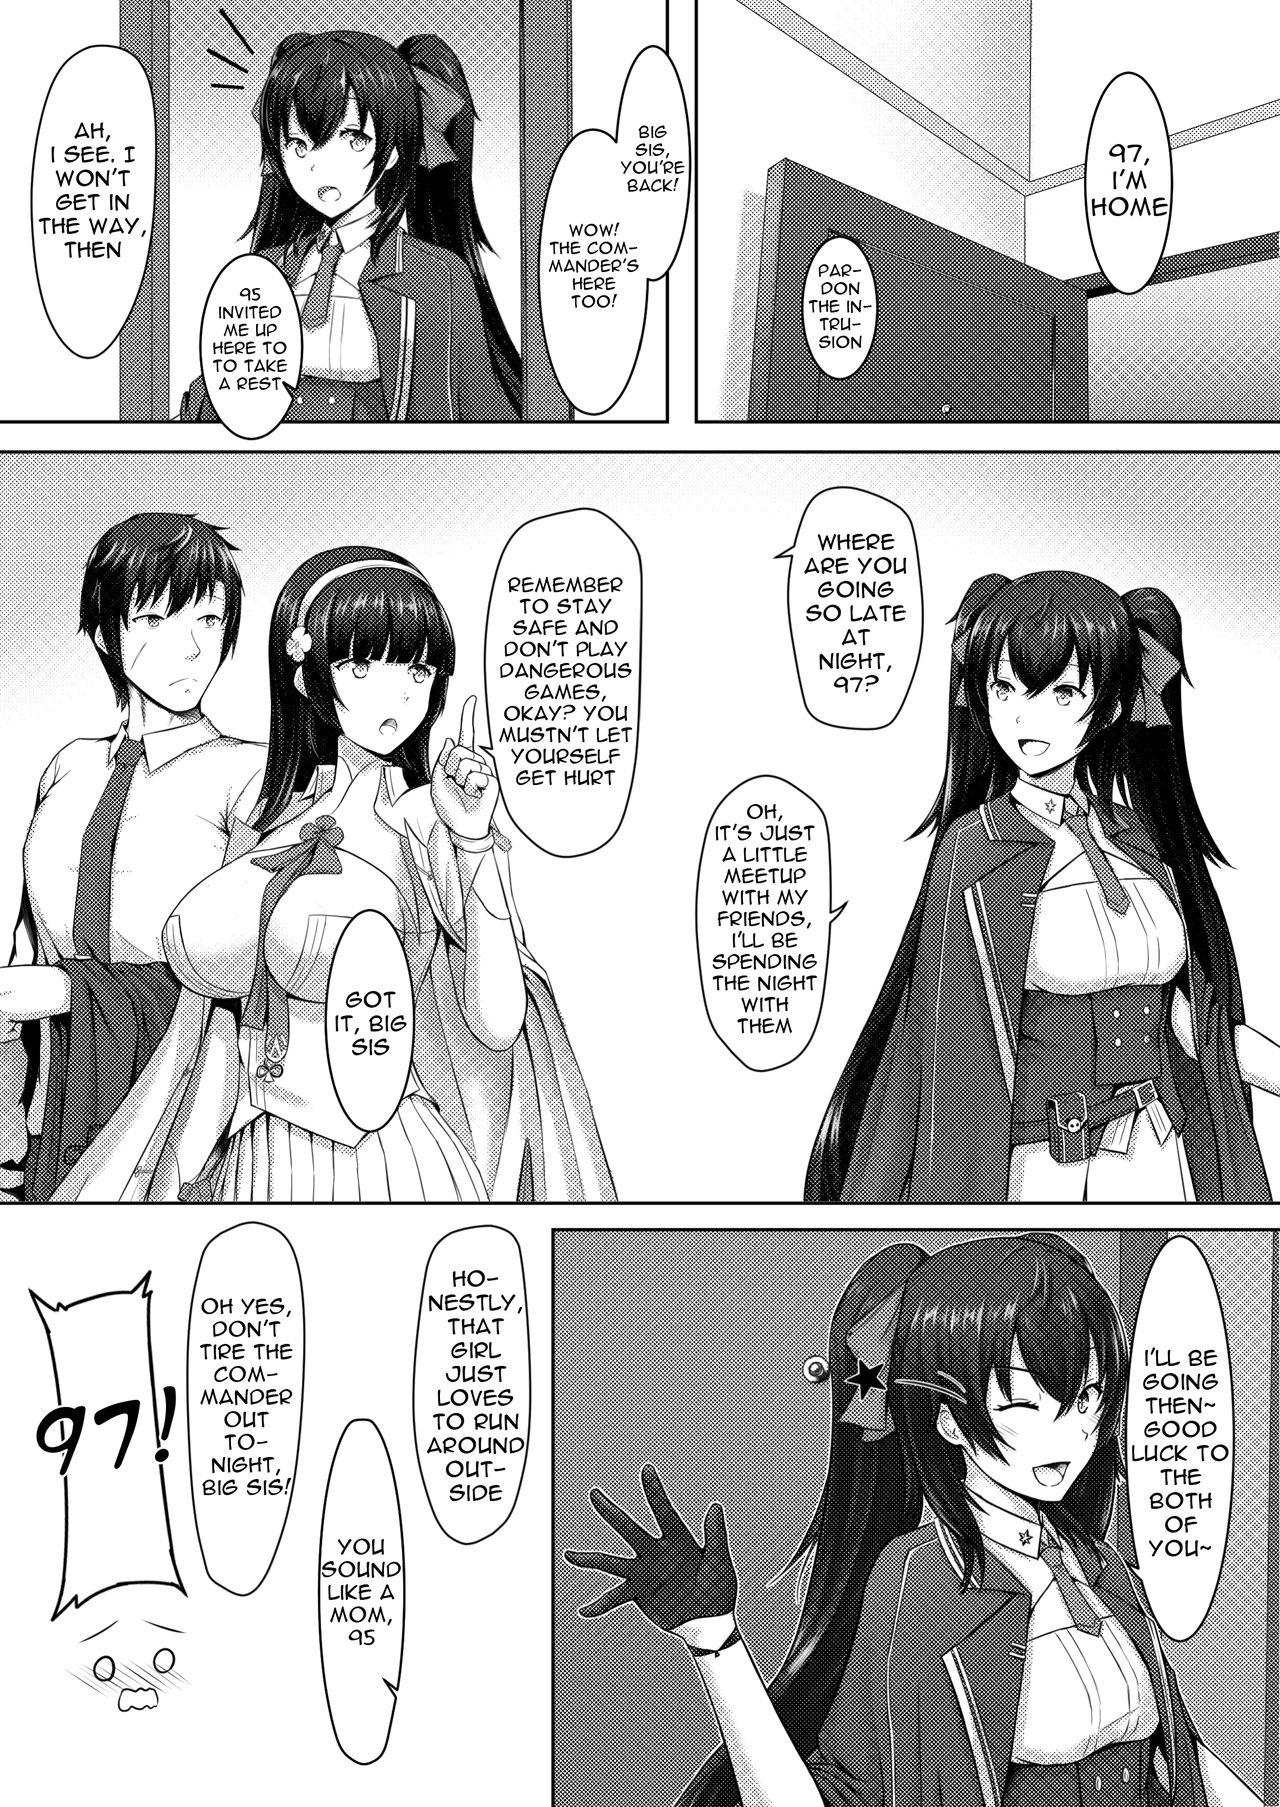 Gay Deepthroat A Lovely Flower's Gift - Girls frontline Hardcore Rough Sex - Page 4